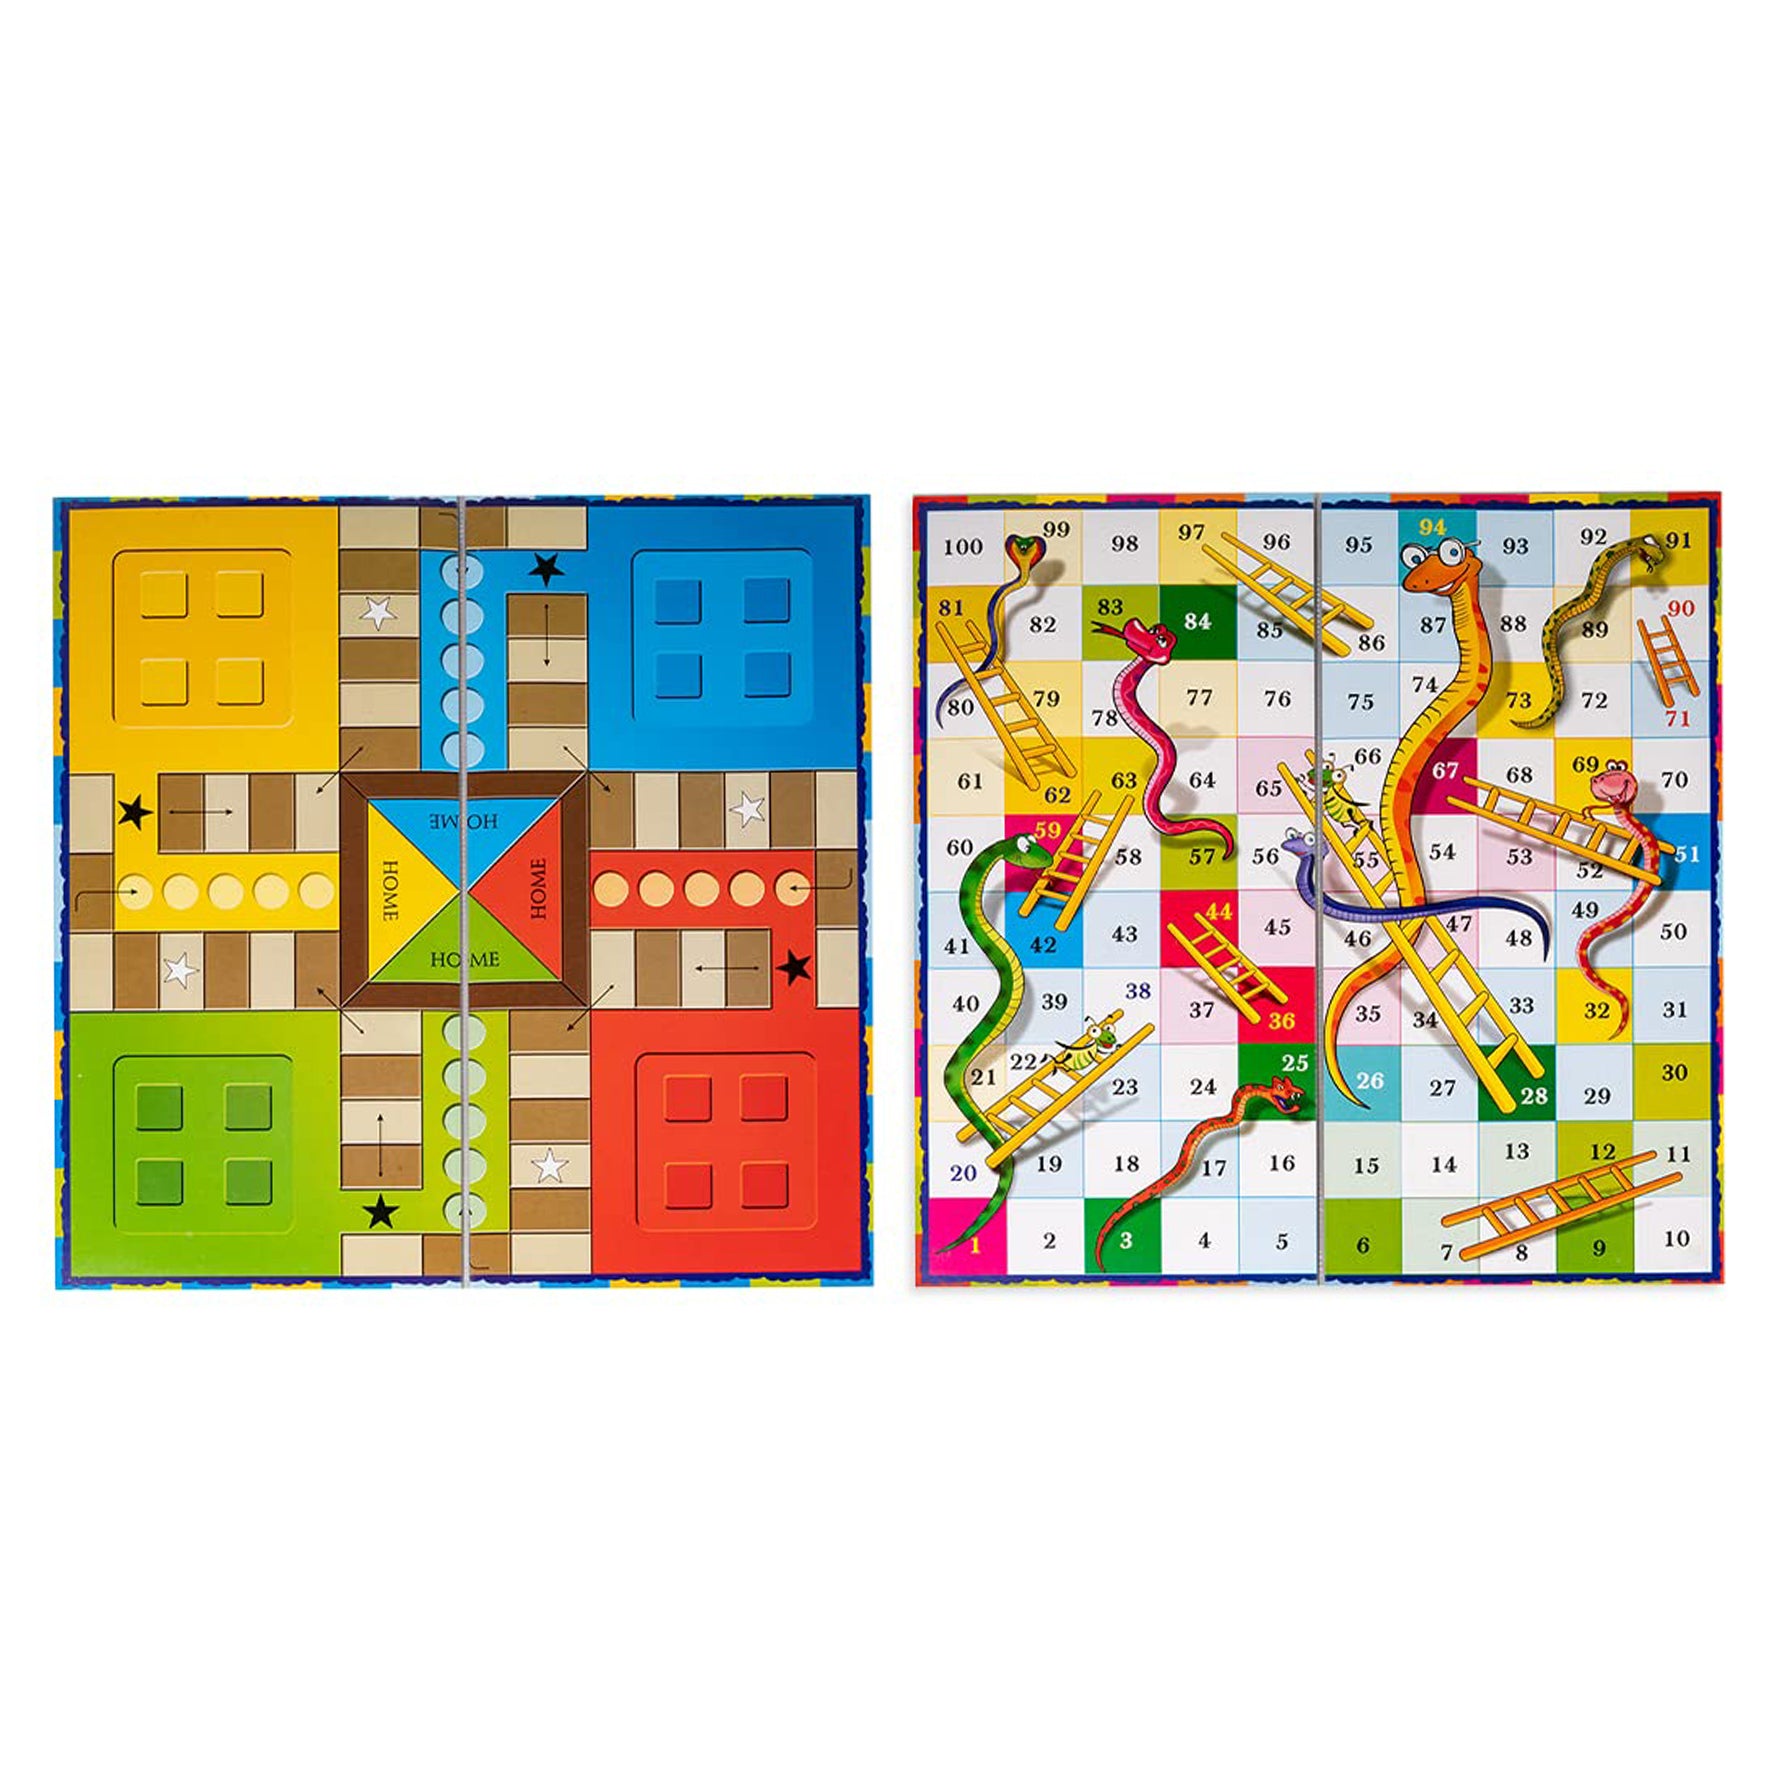 Toysbox Ludo and Snakes & Ladders Small Classic Board Game to Play with Kids and Adults